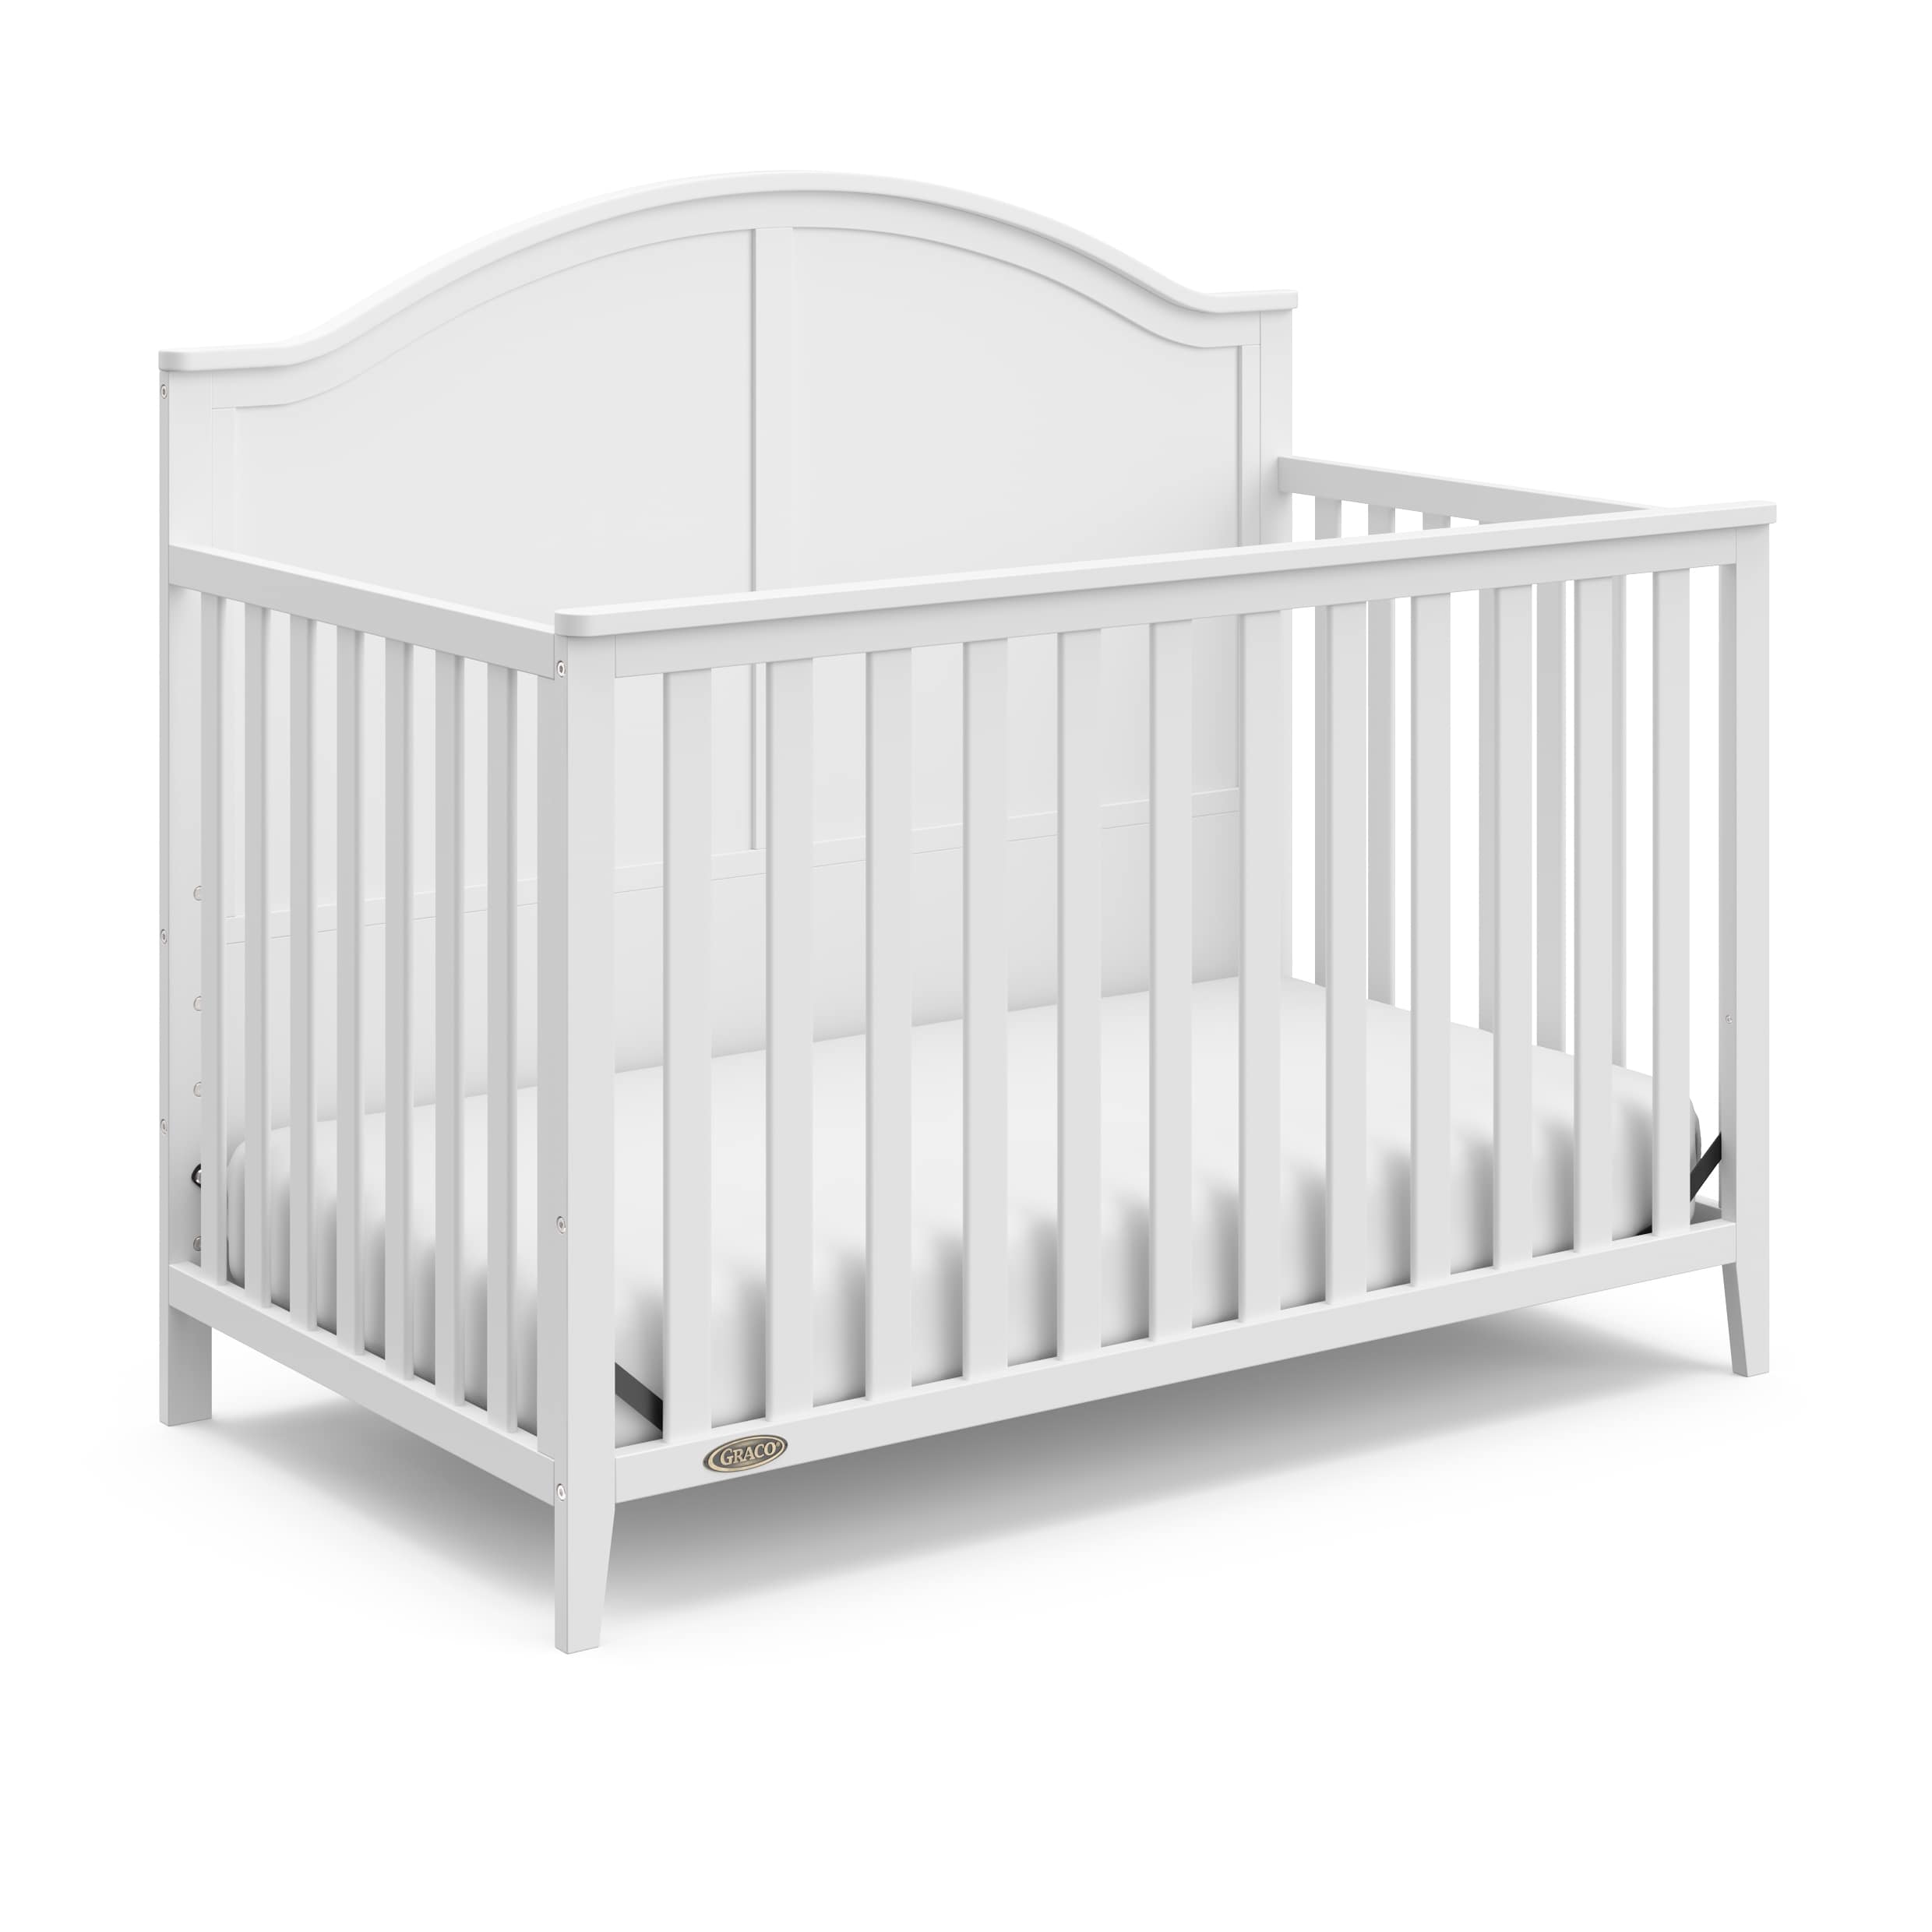 Graco Wilfred 5-in-1 Convertible Baby Crib, White - image 1 of 12